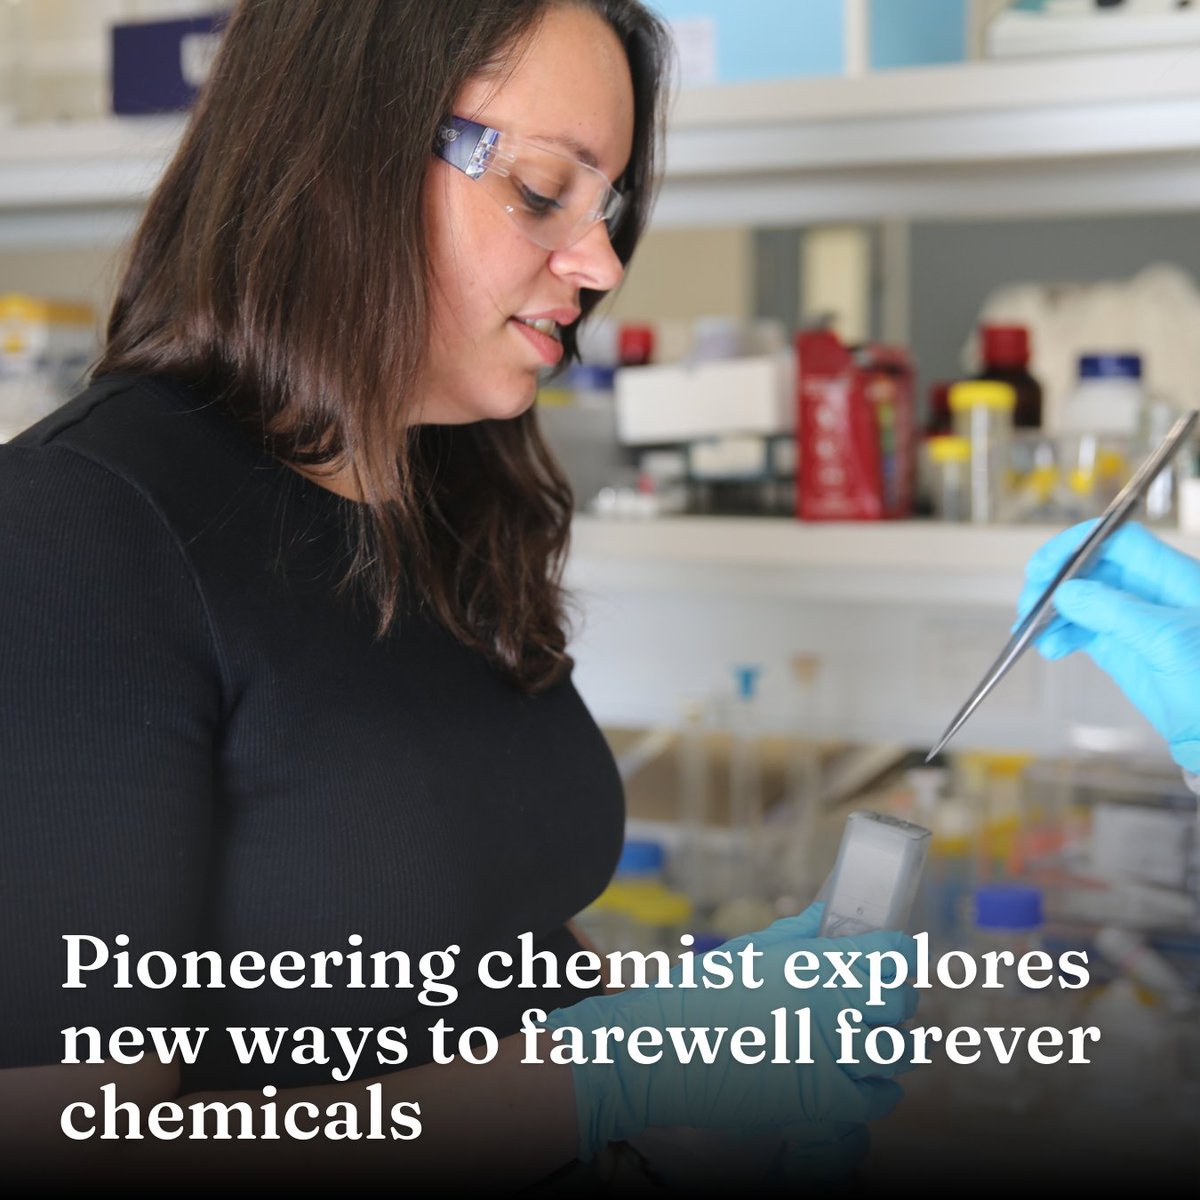 🧪 Chemical engineer @KatrinaWruck is researching ways to reduce 'forever chemicals' that threaten the environment. Follow her path from @QUT's Indigenous Australians PhD program to designing & building a lab-scale device that breaks down #PFAS → unimelb.me/44FWwZq